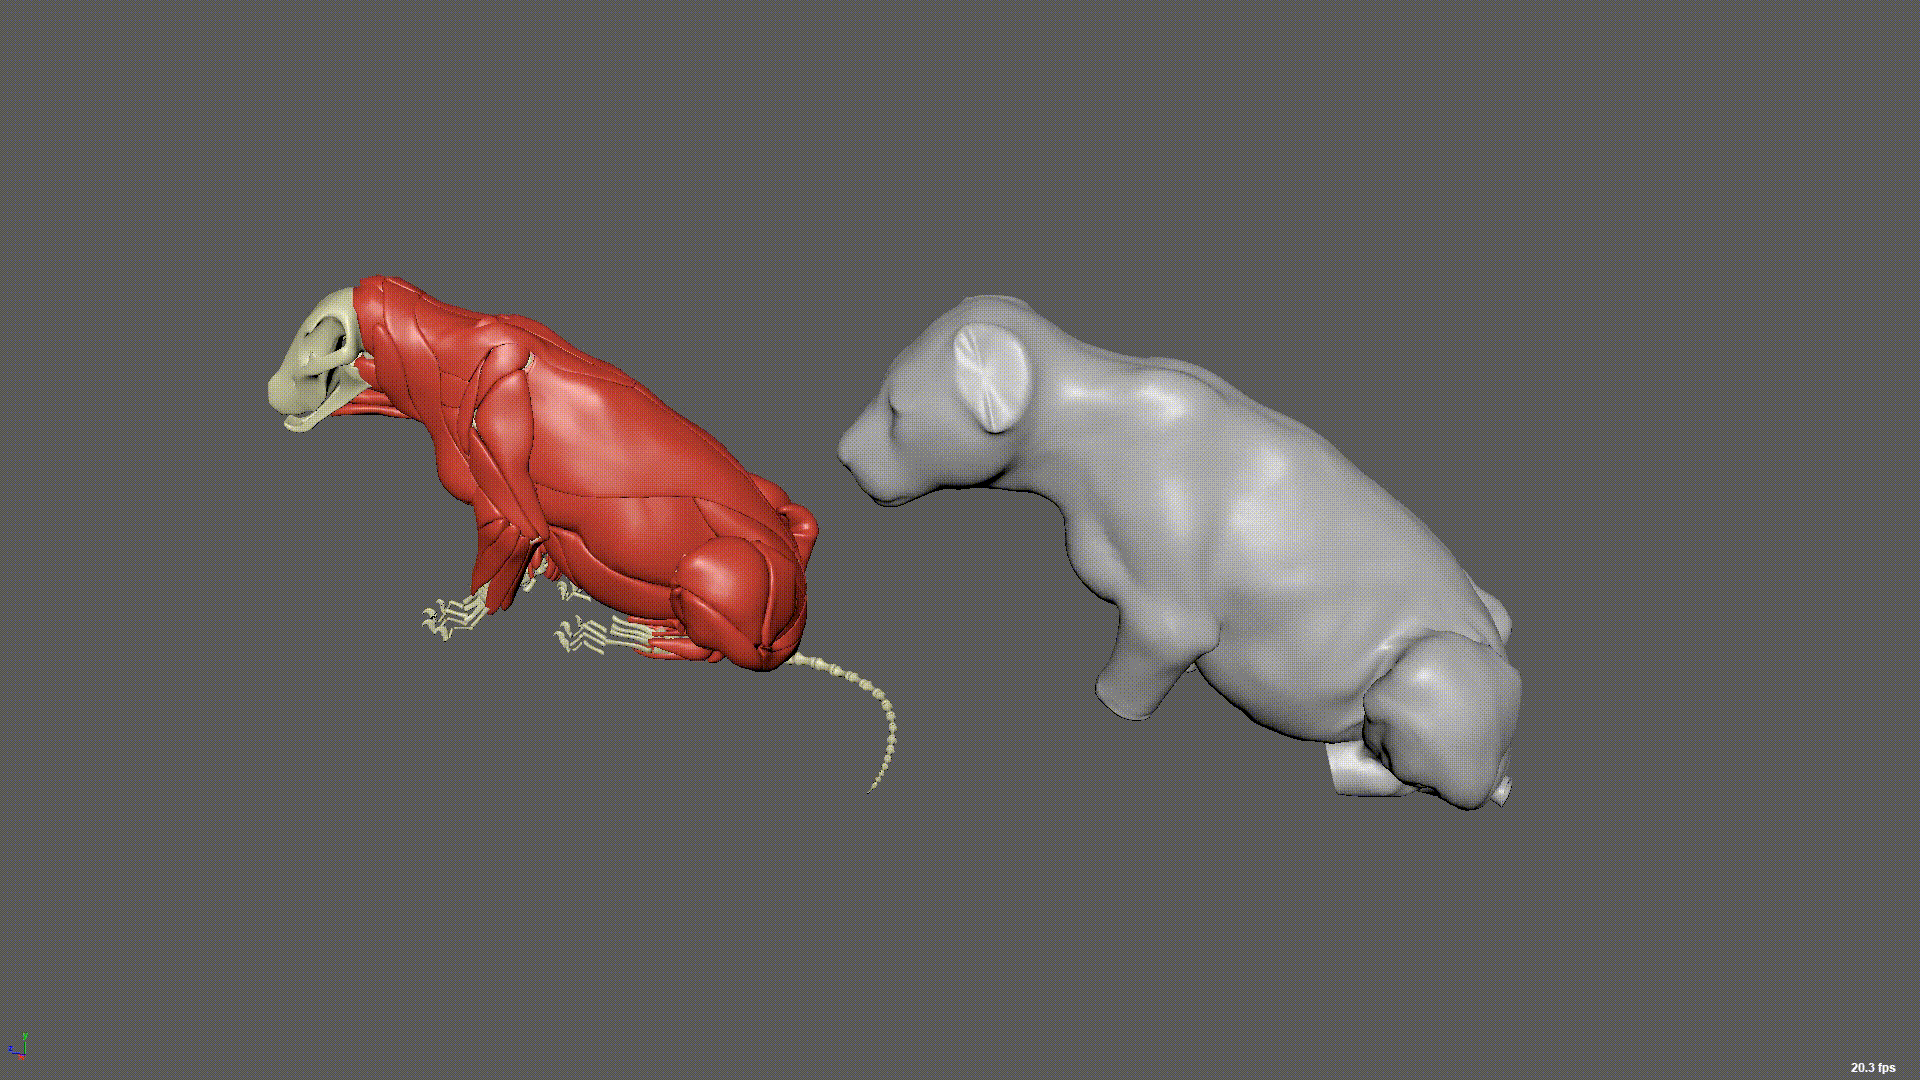 Two grey lion cubs in Unity Editor side by side, walking and stretching